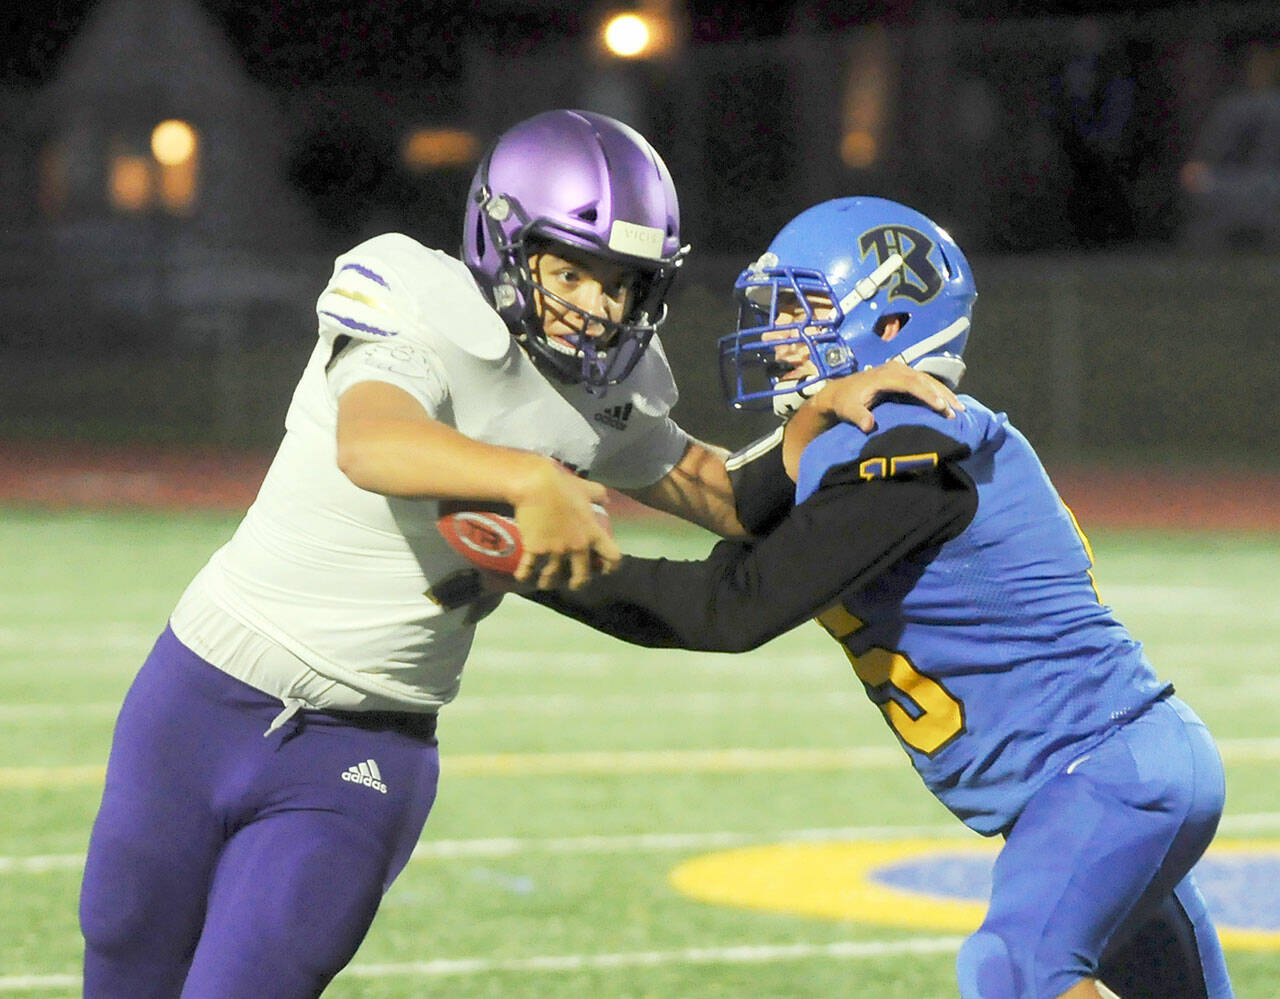 Michael Dashiell/Olympic Peninsula News Group
Sequim quarterback Lars Wiker, left, tries to avoid the grasp of a Bremerton defender in the Wolves' 35-29 loss at Bremerton on Thursday.